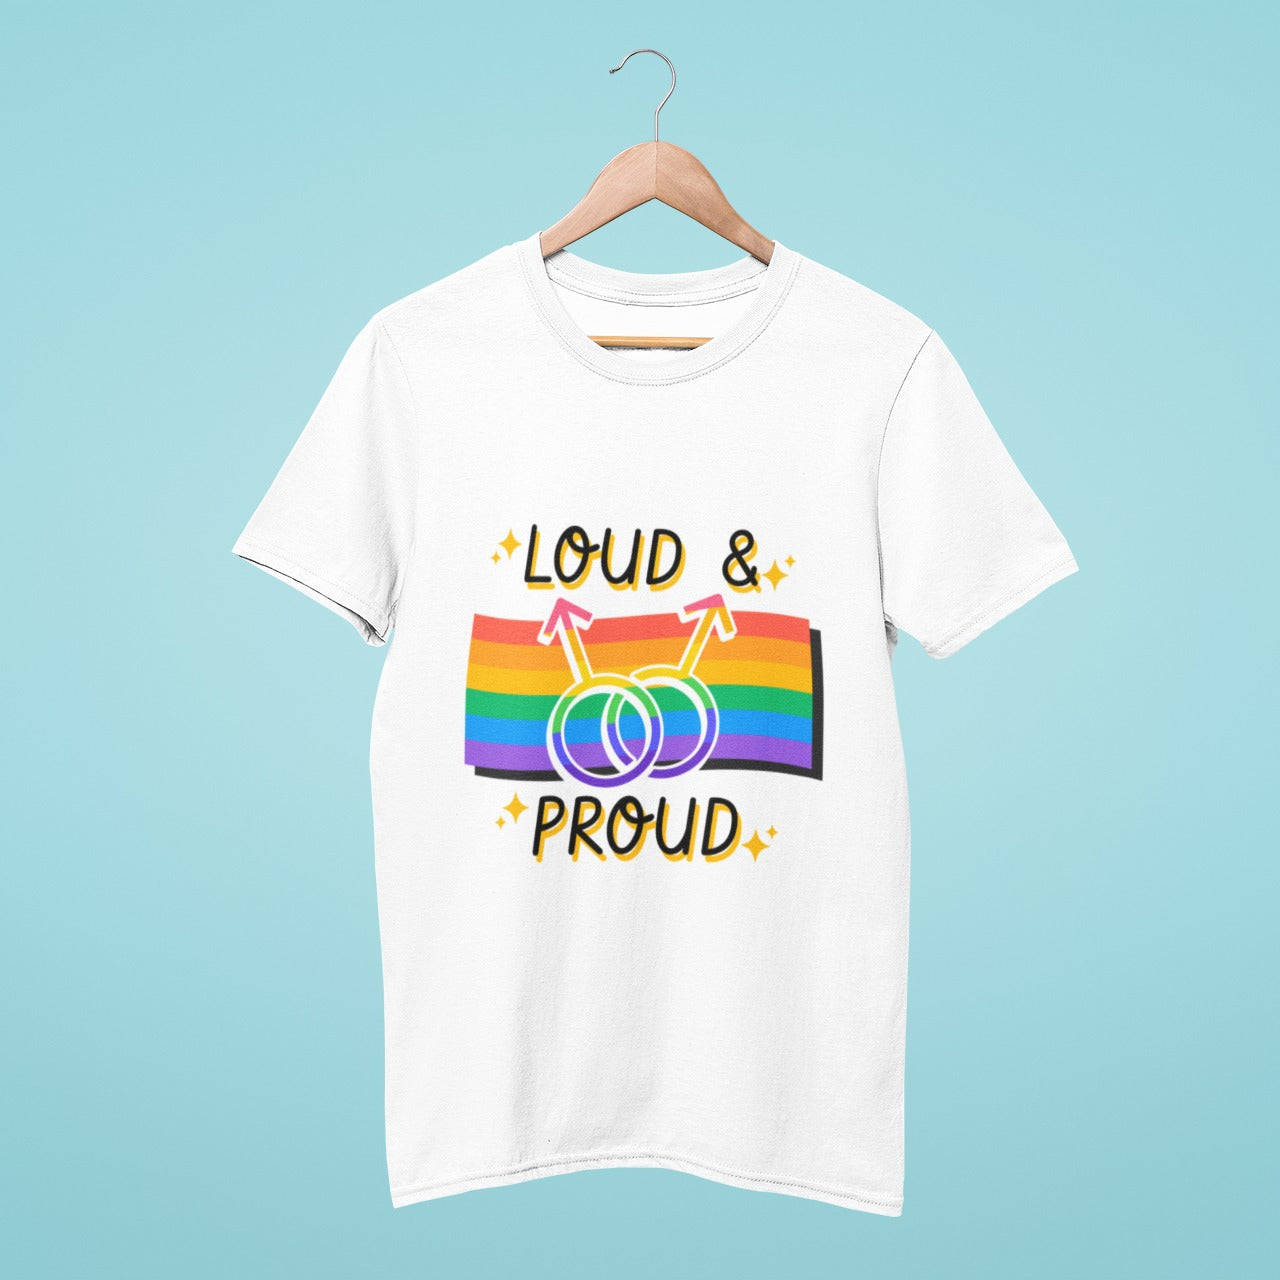 Celebrate love and acceptance with our white "Loud & Proud" t-shirt featuring a rainbow flag and two entangled male symbols. Made from high-quality materials, this tee is comfortable, durable, and perfect for any occasion. Show your support for the LGBTQ+ community and wear your pride on your sleeve with this stylish and impactful t-shirt. Order yours today!